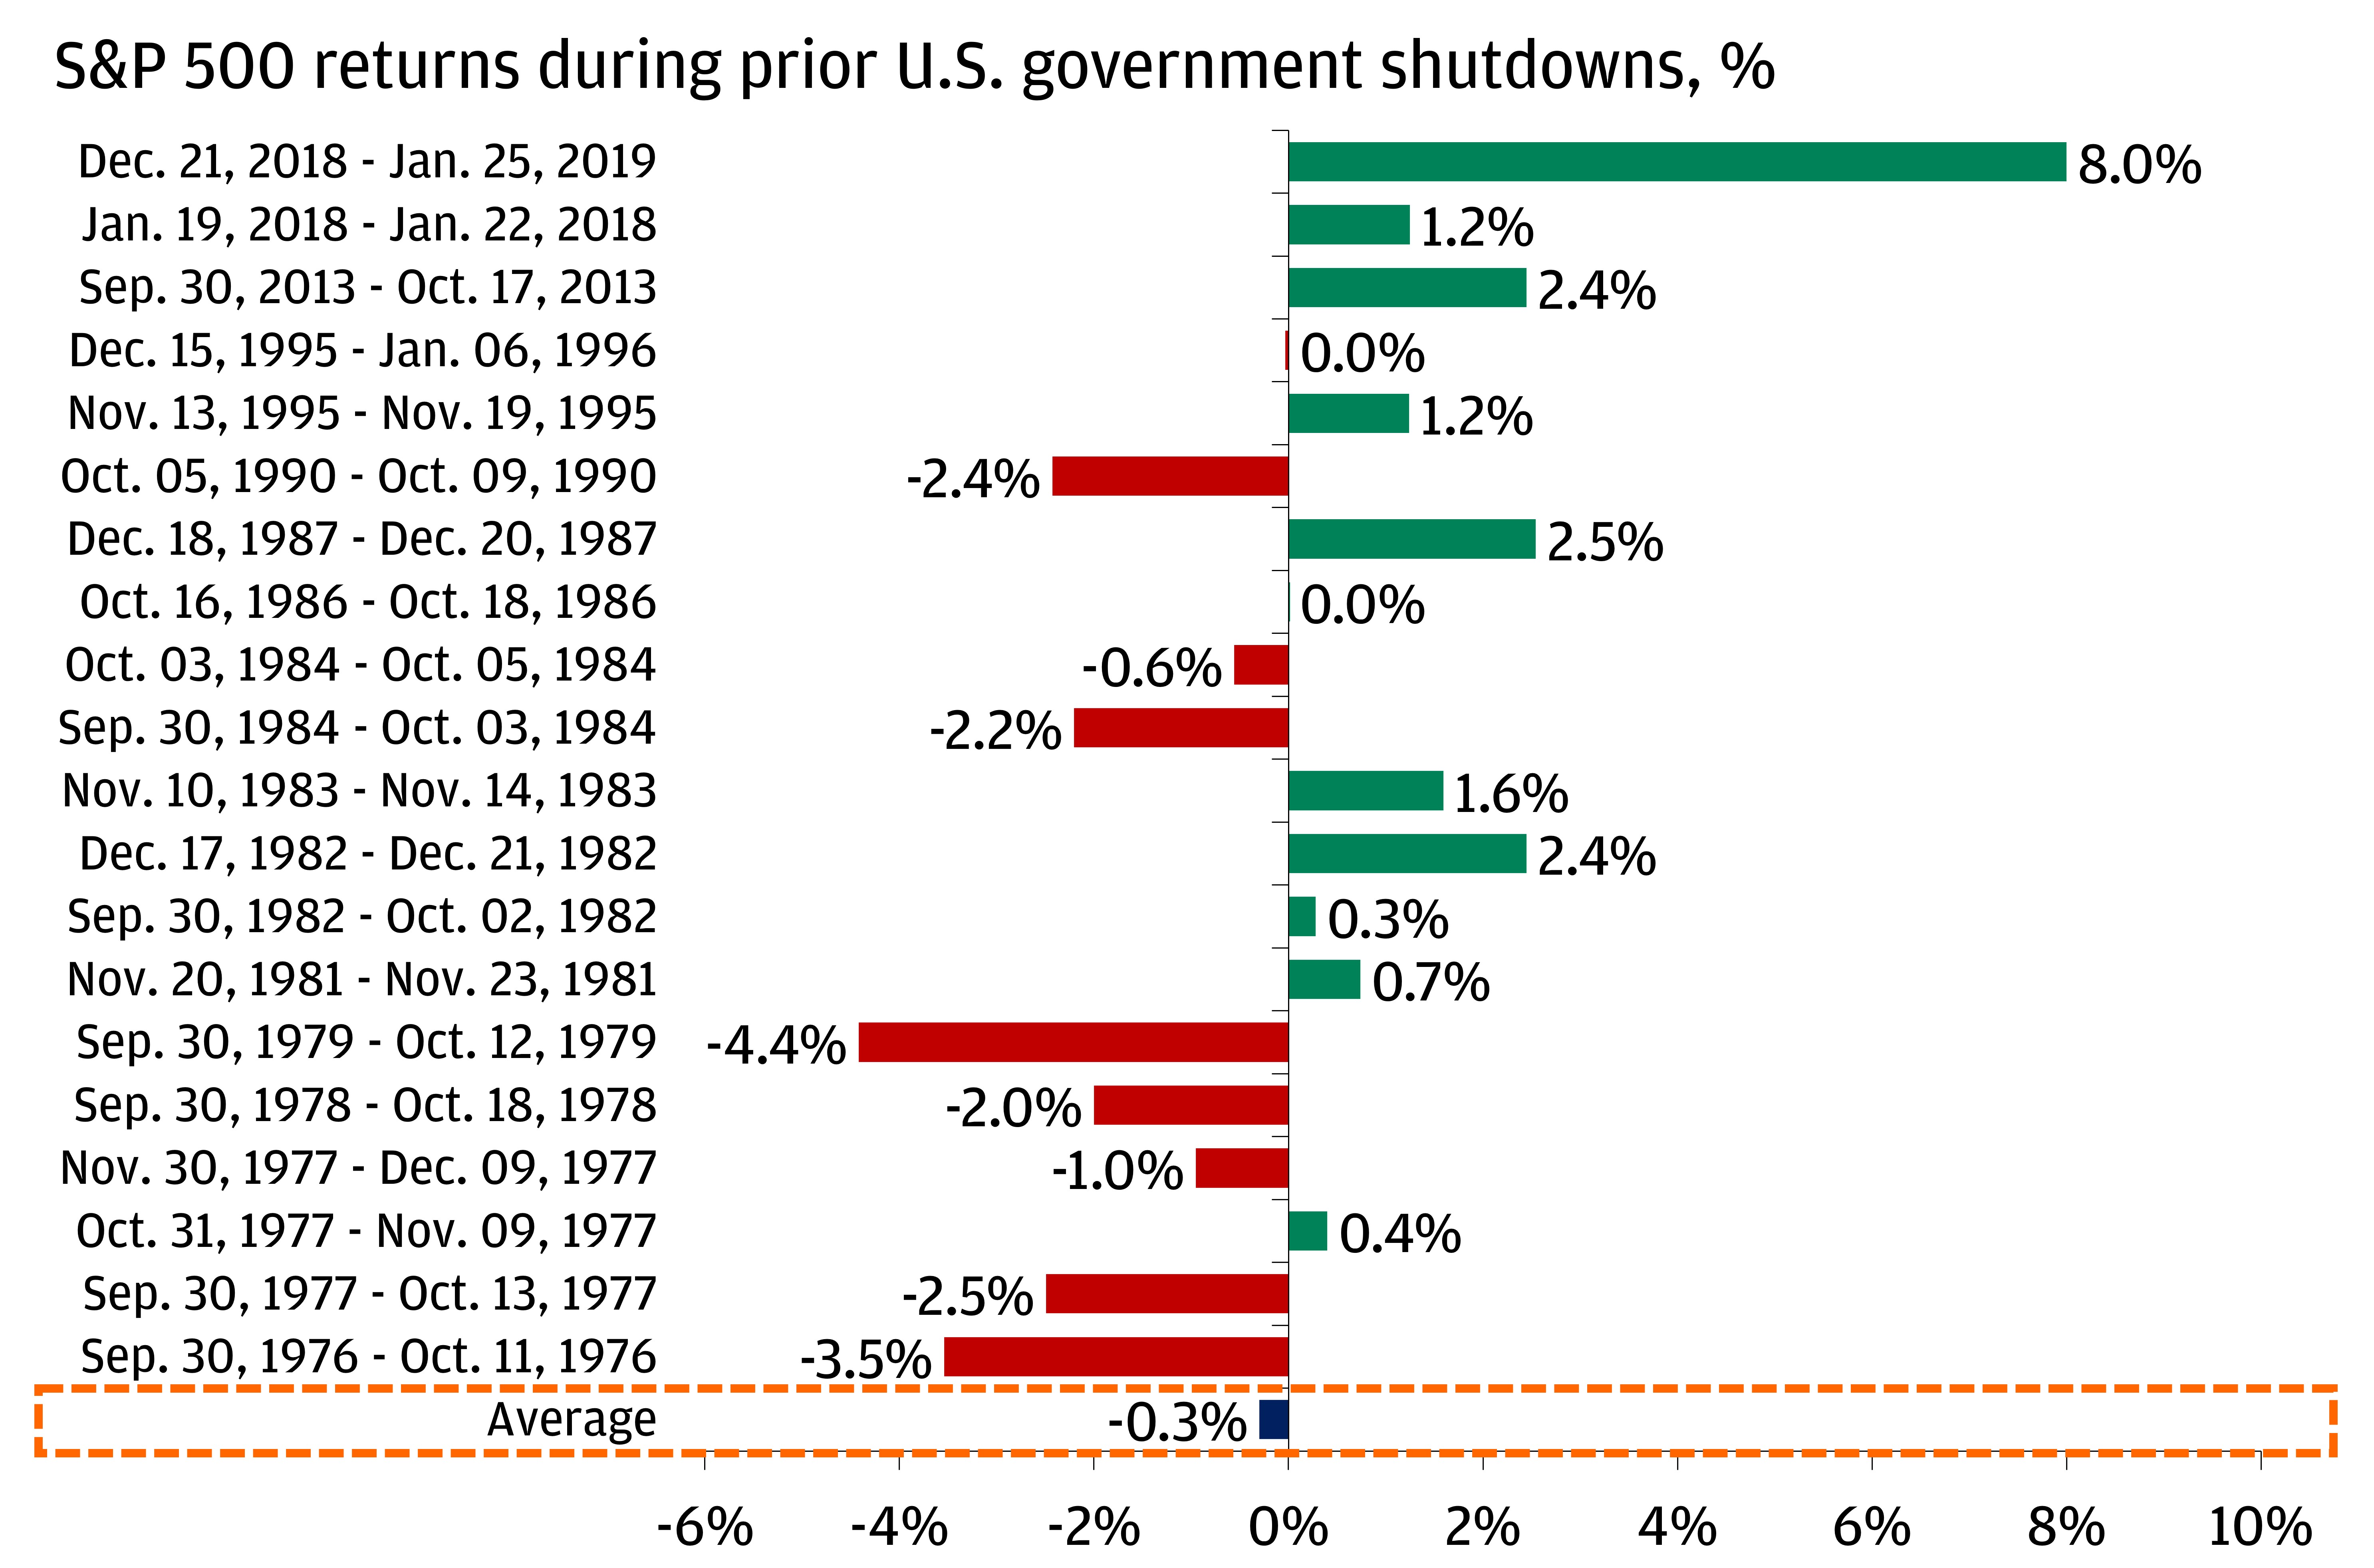 The chart shows the S&P returns during prior U.S. government shutdowns. 